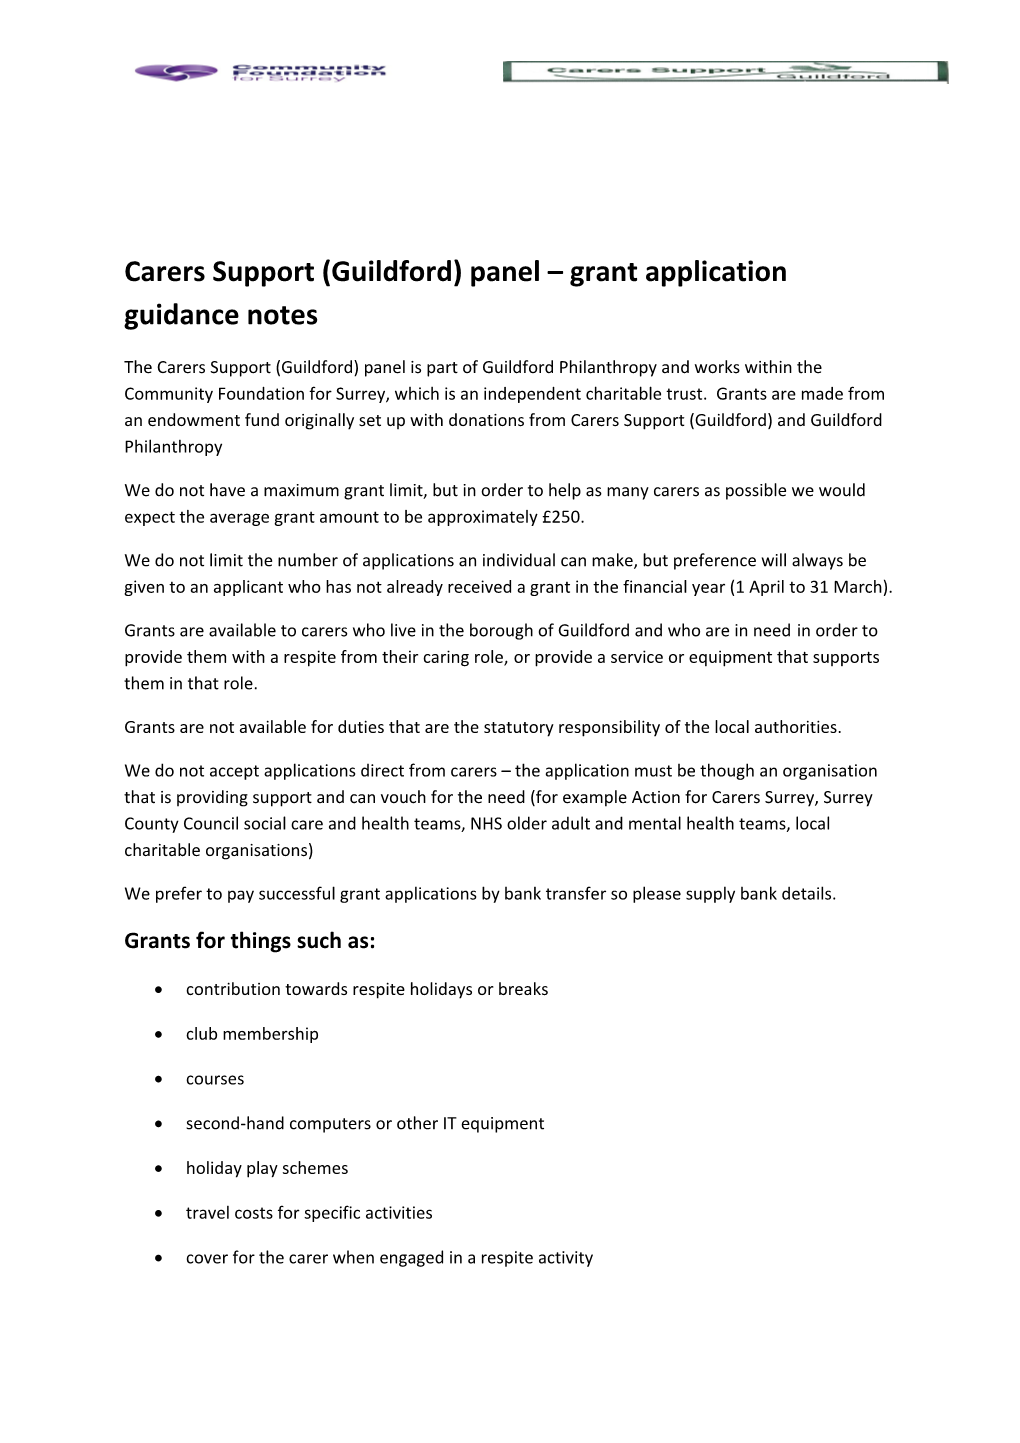 Carers Support (Guildford) Panel Grant Application Guidance Notes